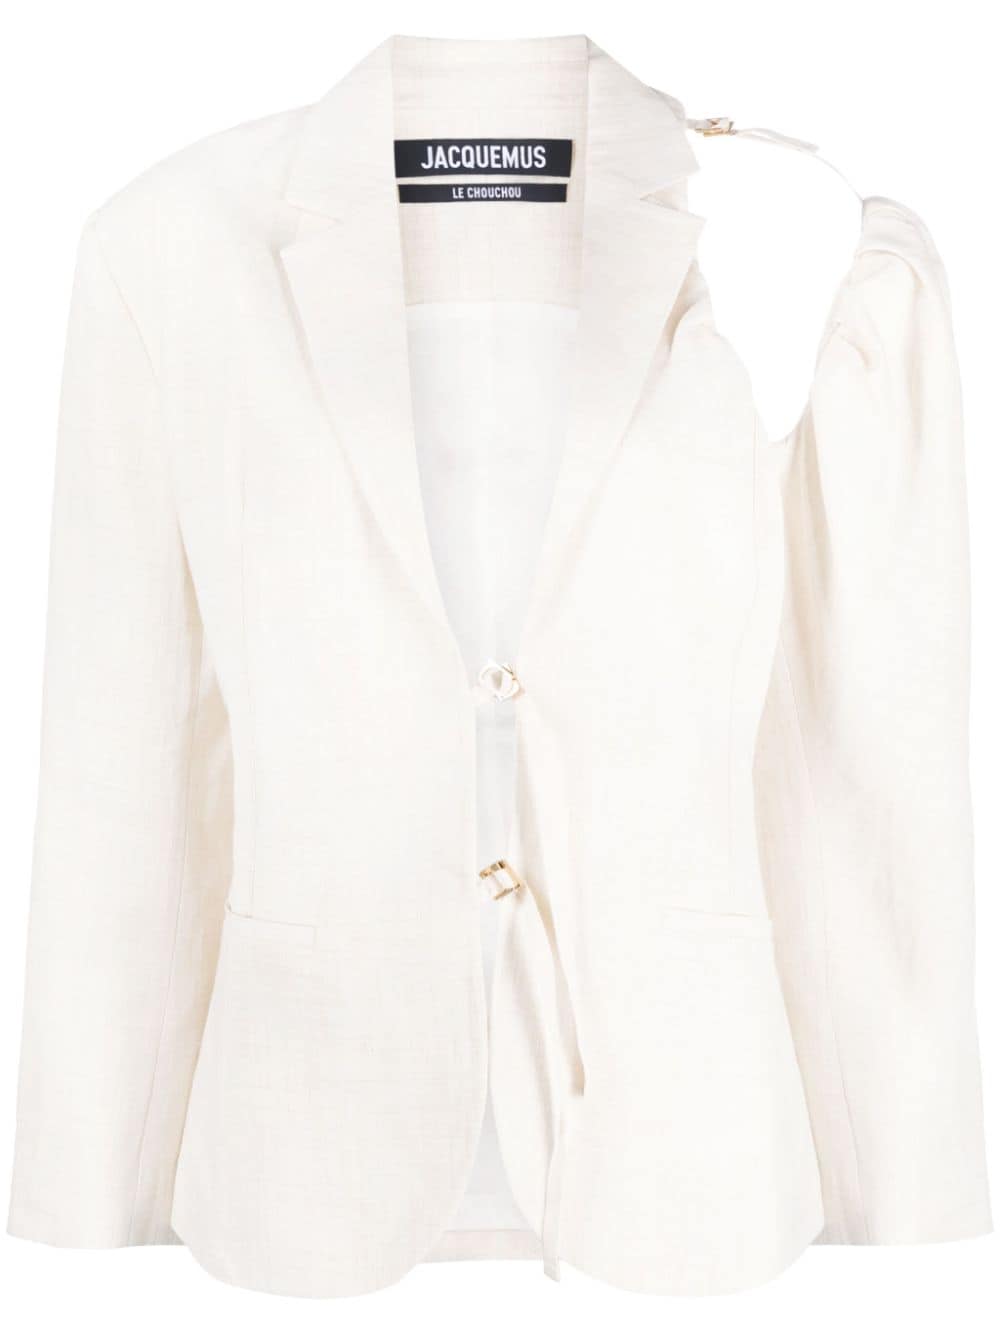 JACQUEMUS Women's White Asymmetrical Blazer with Cut-Out Detailing and Gold-Tone Hardware